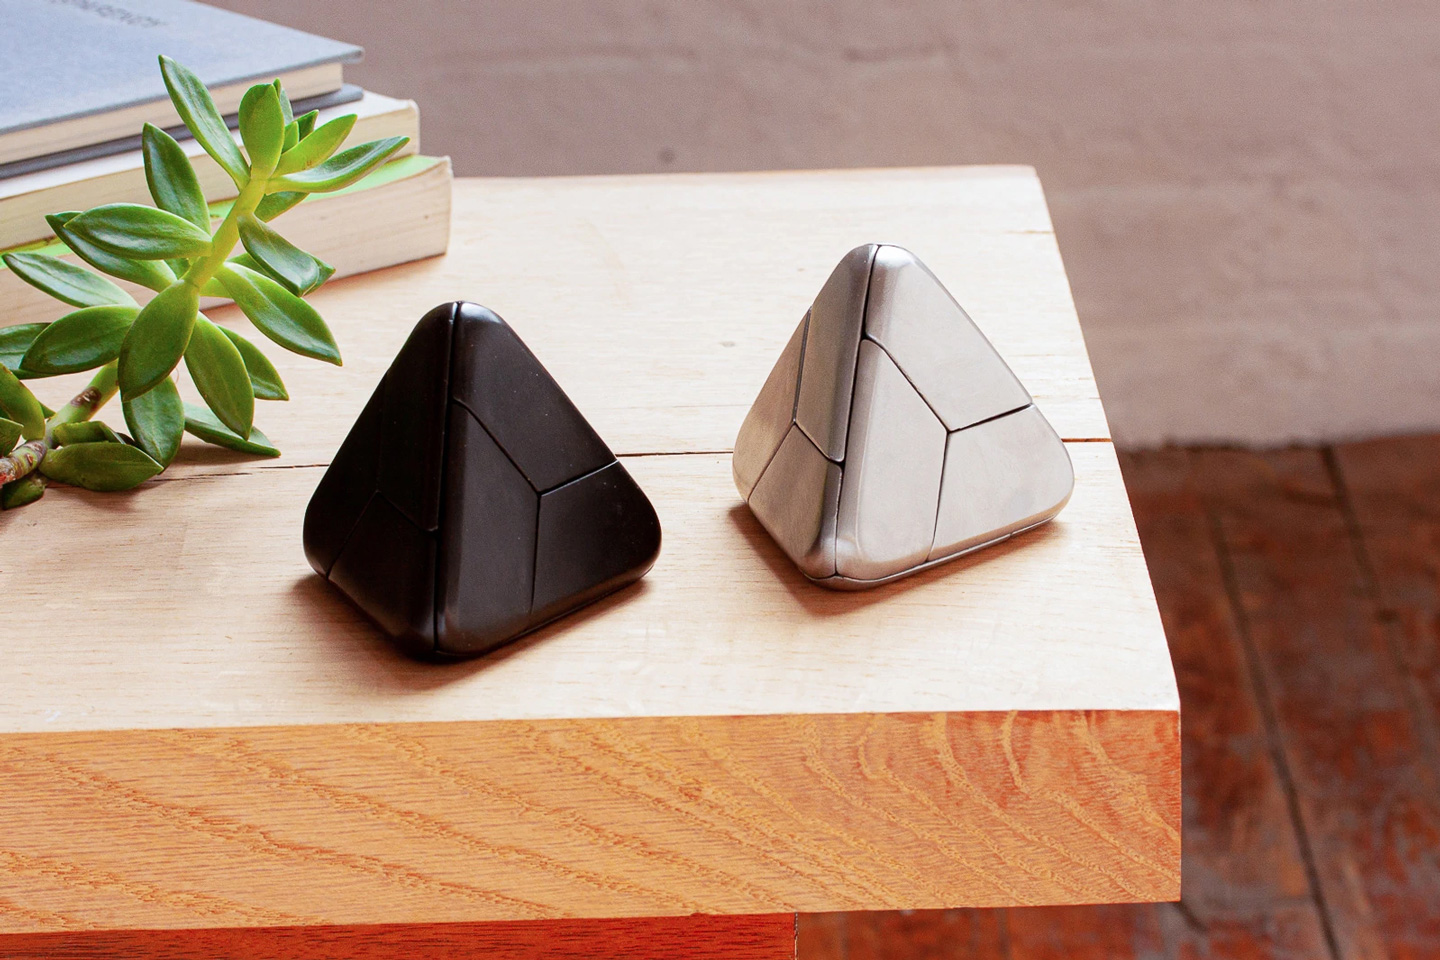 #Craighill Tetra is a fidget toy for your hands and your brain